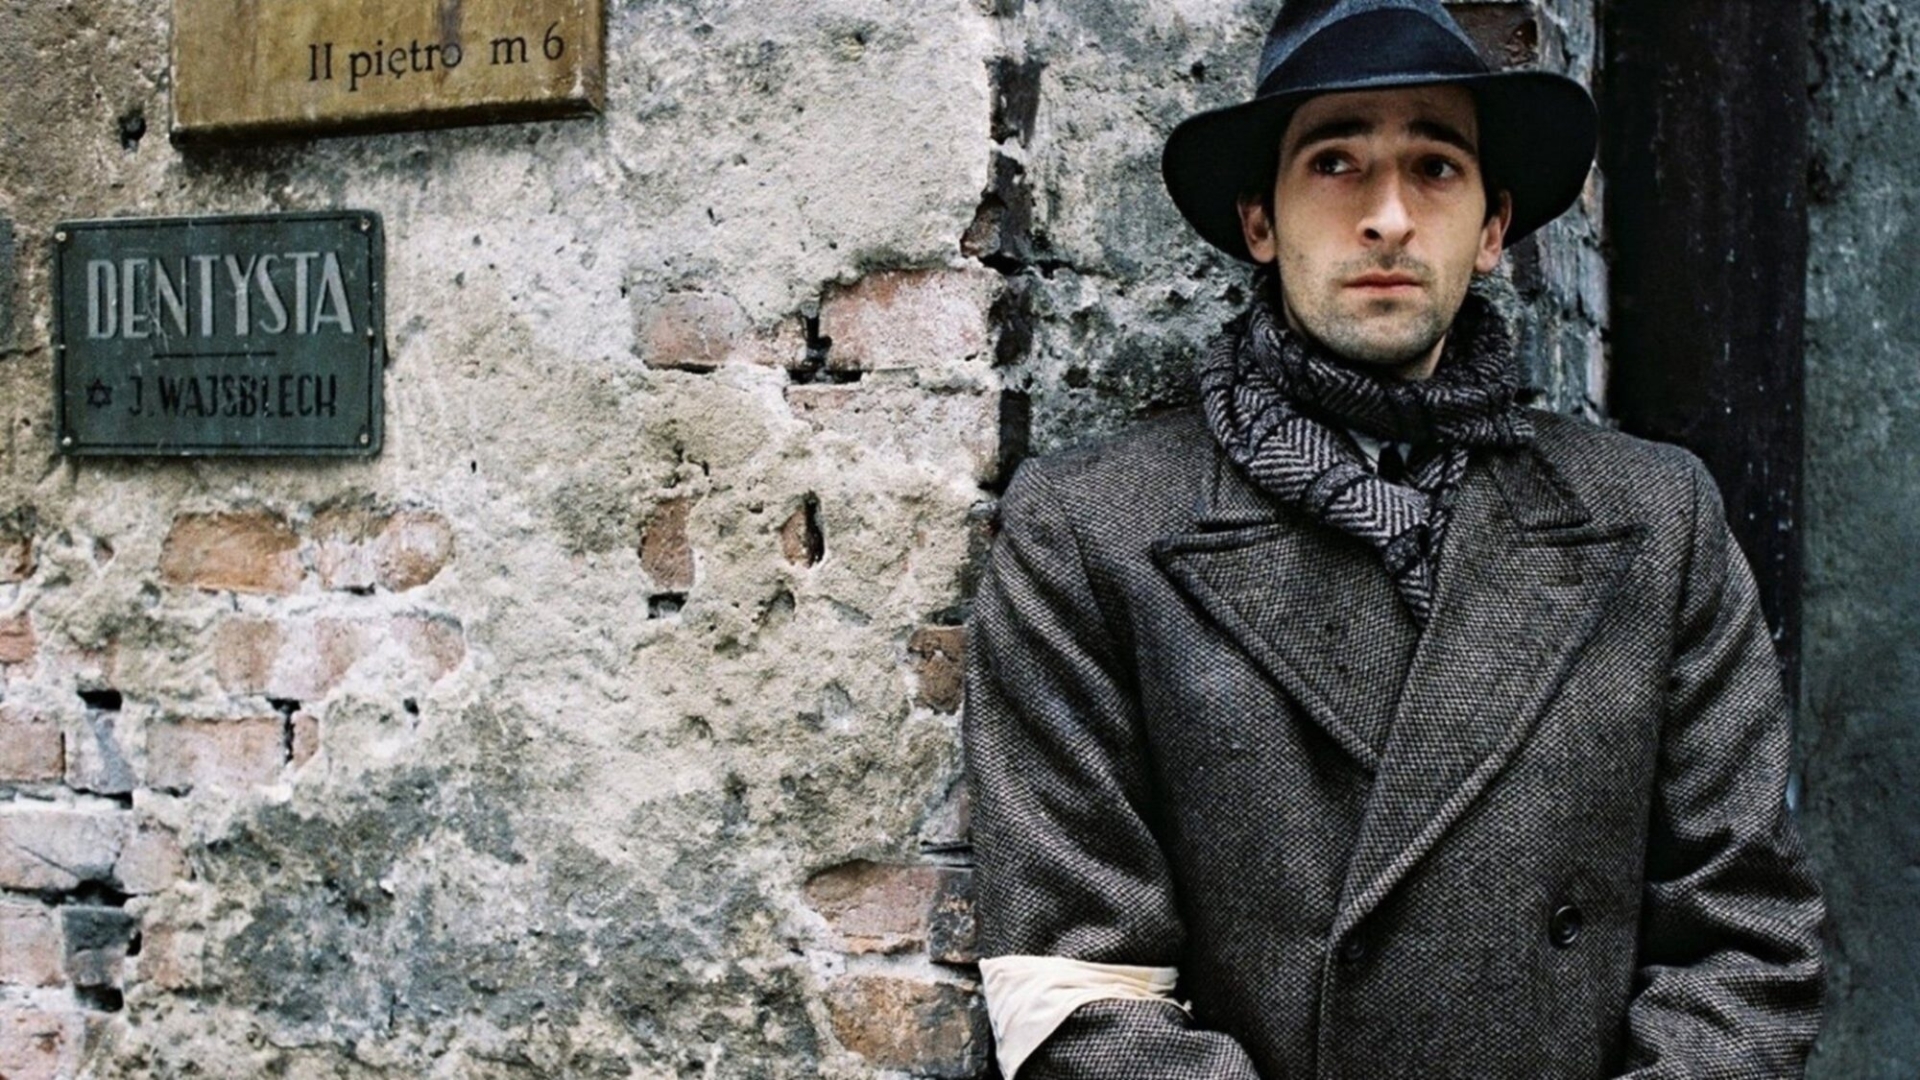 The Pianist (The Pianist)